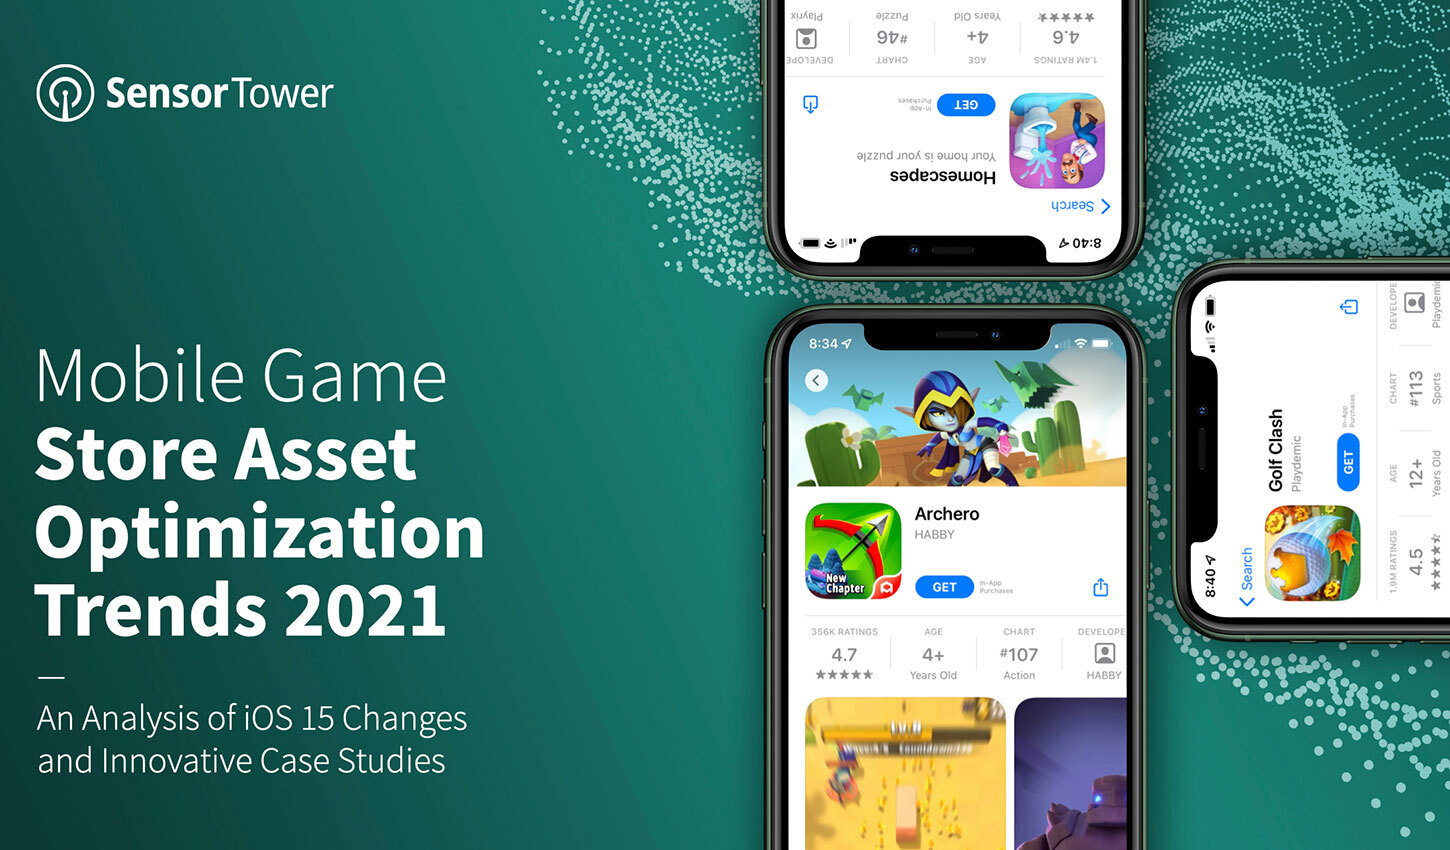 Mobile Game Store Asset Optimization Trends 2021 main image feature